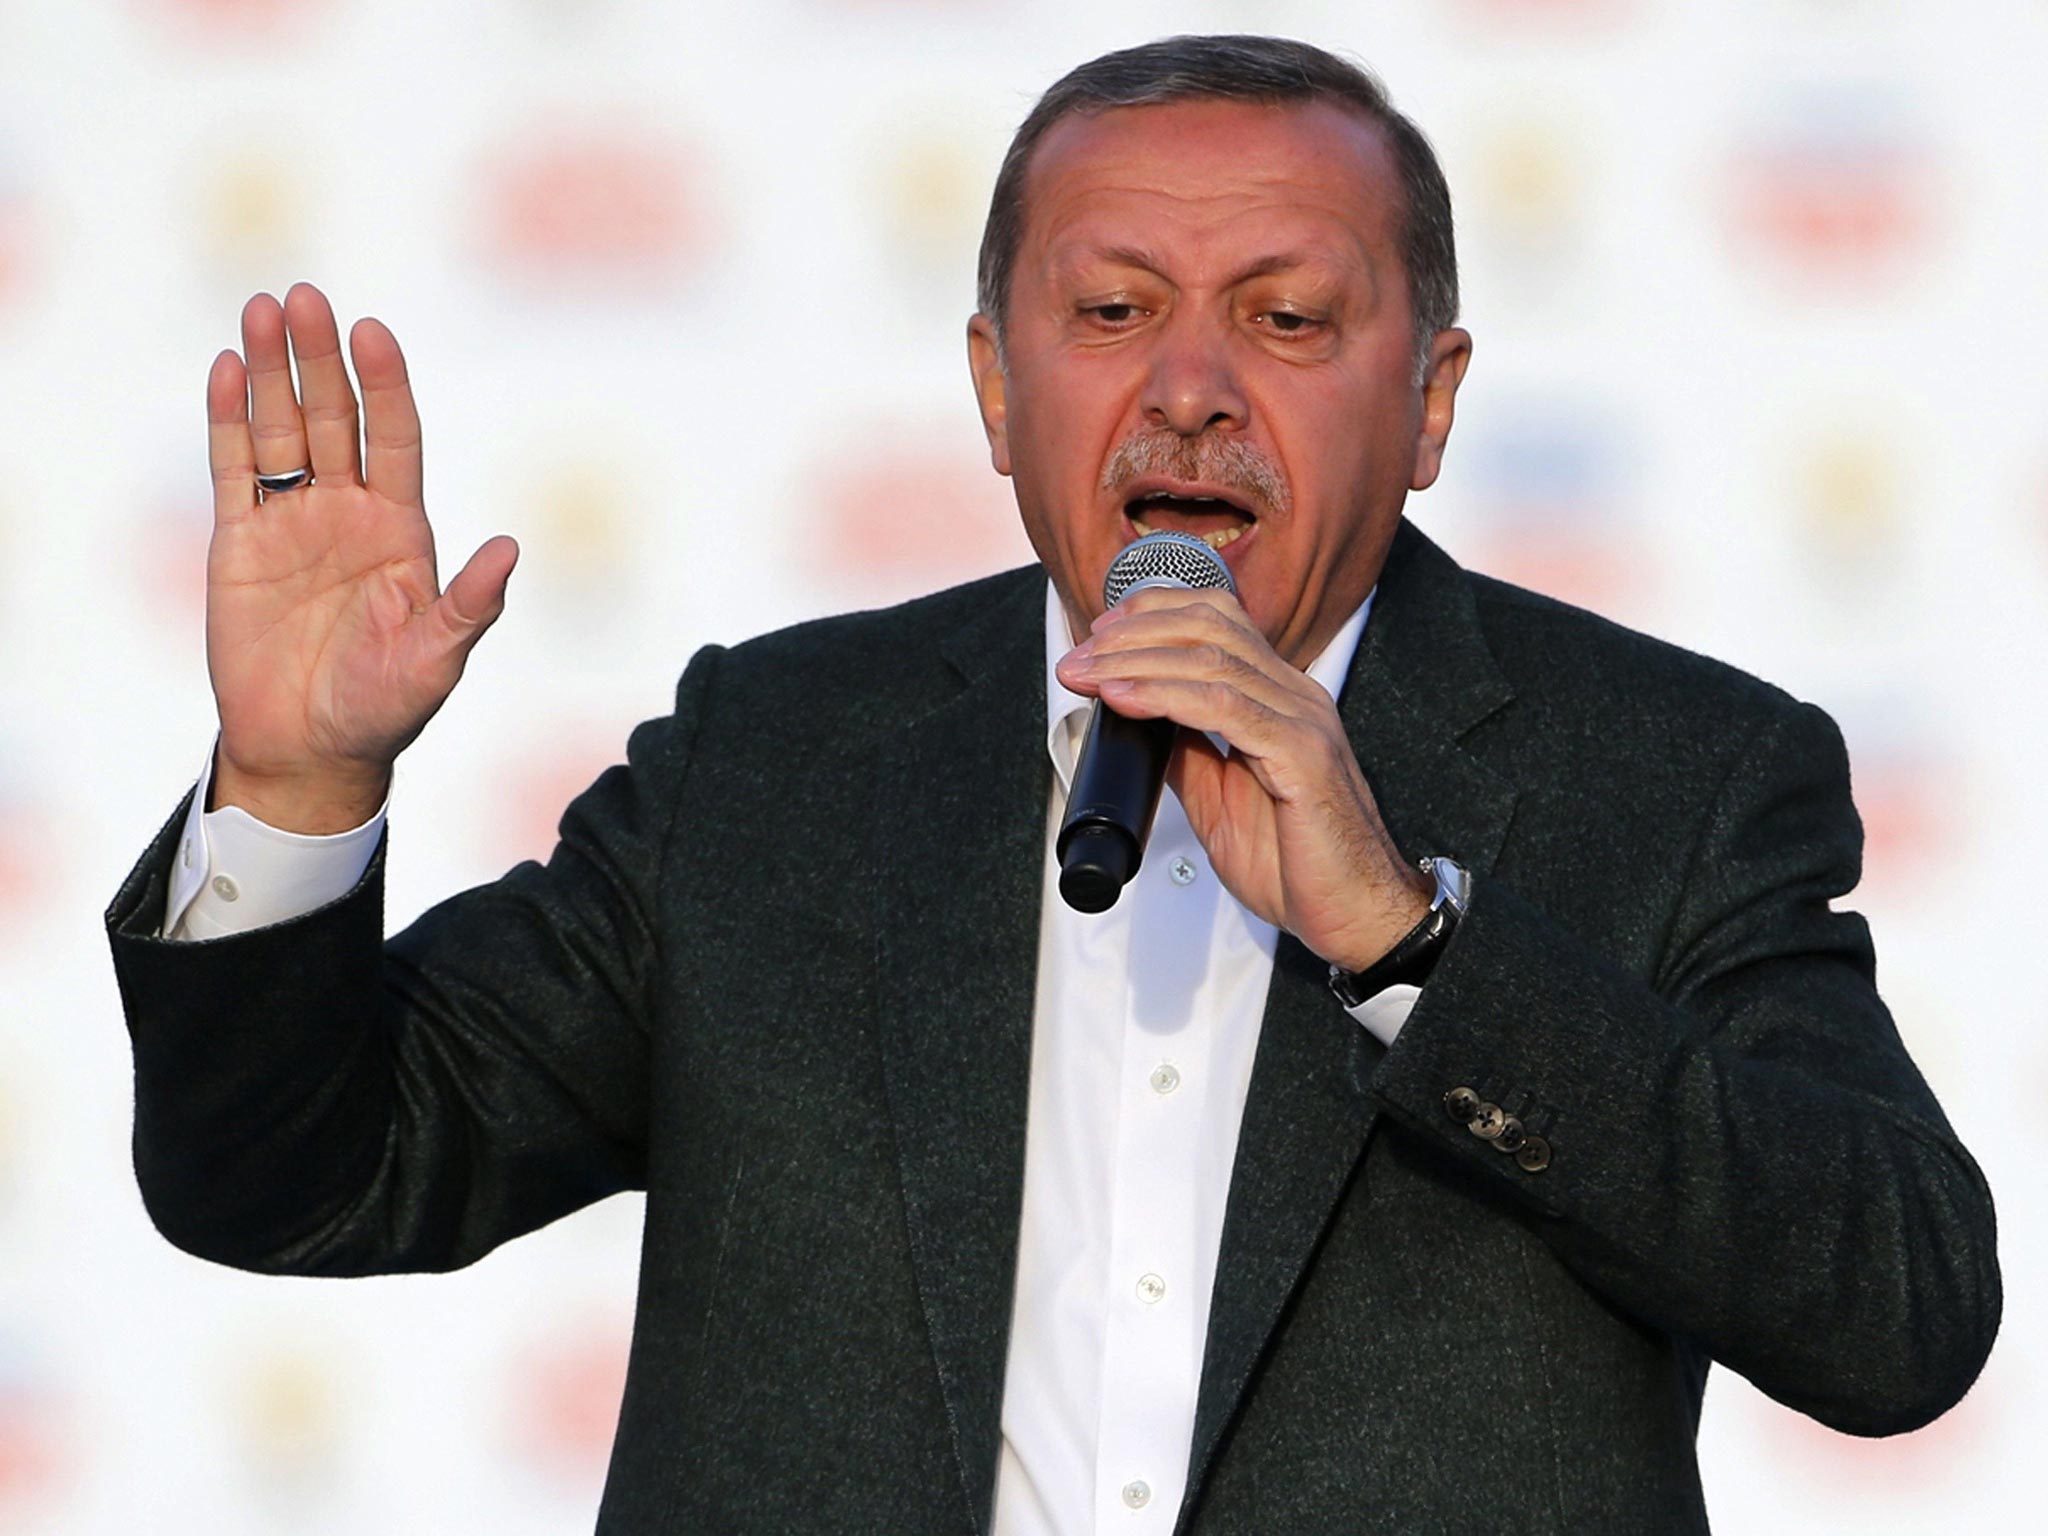 Prime Minister Erdogan dismissed accusations of intolerance during a rally on Sunday, saying: ‘I don’t care who it is. I’m not listening’